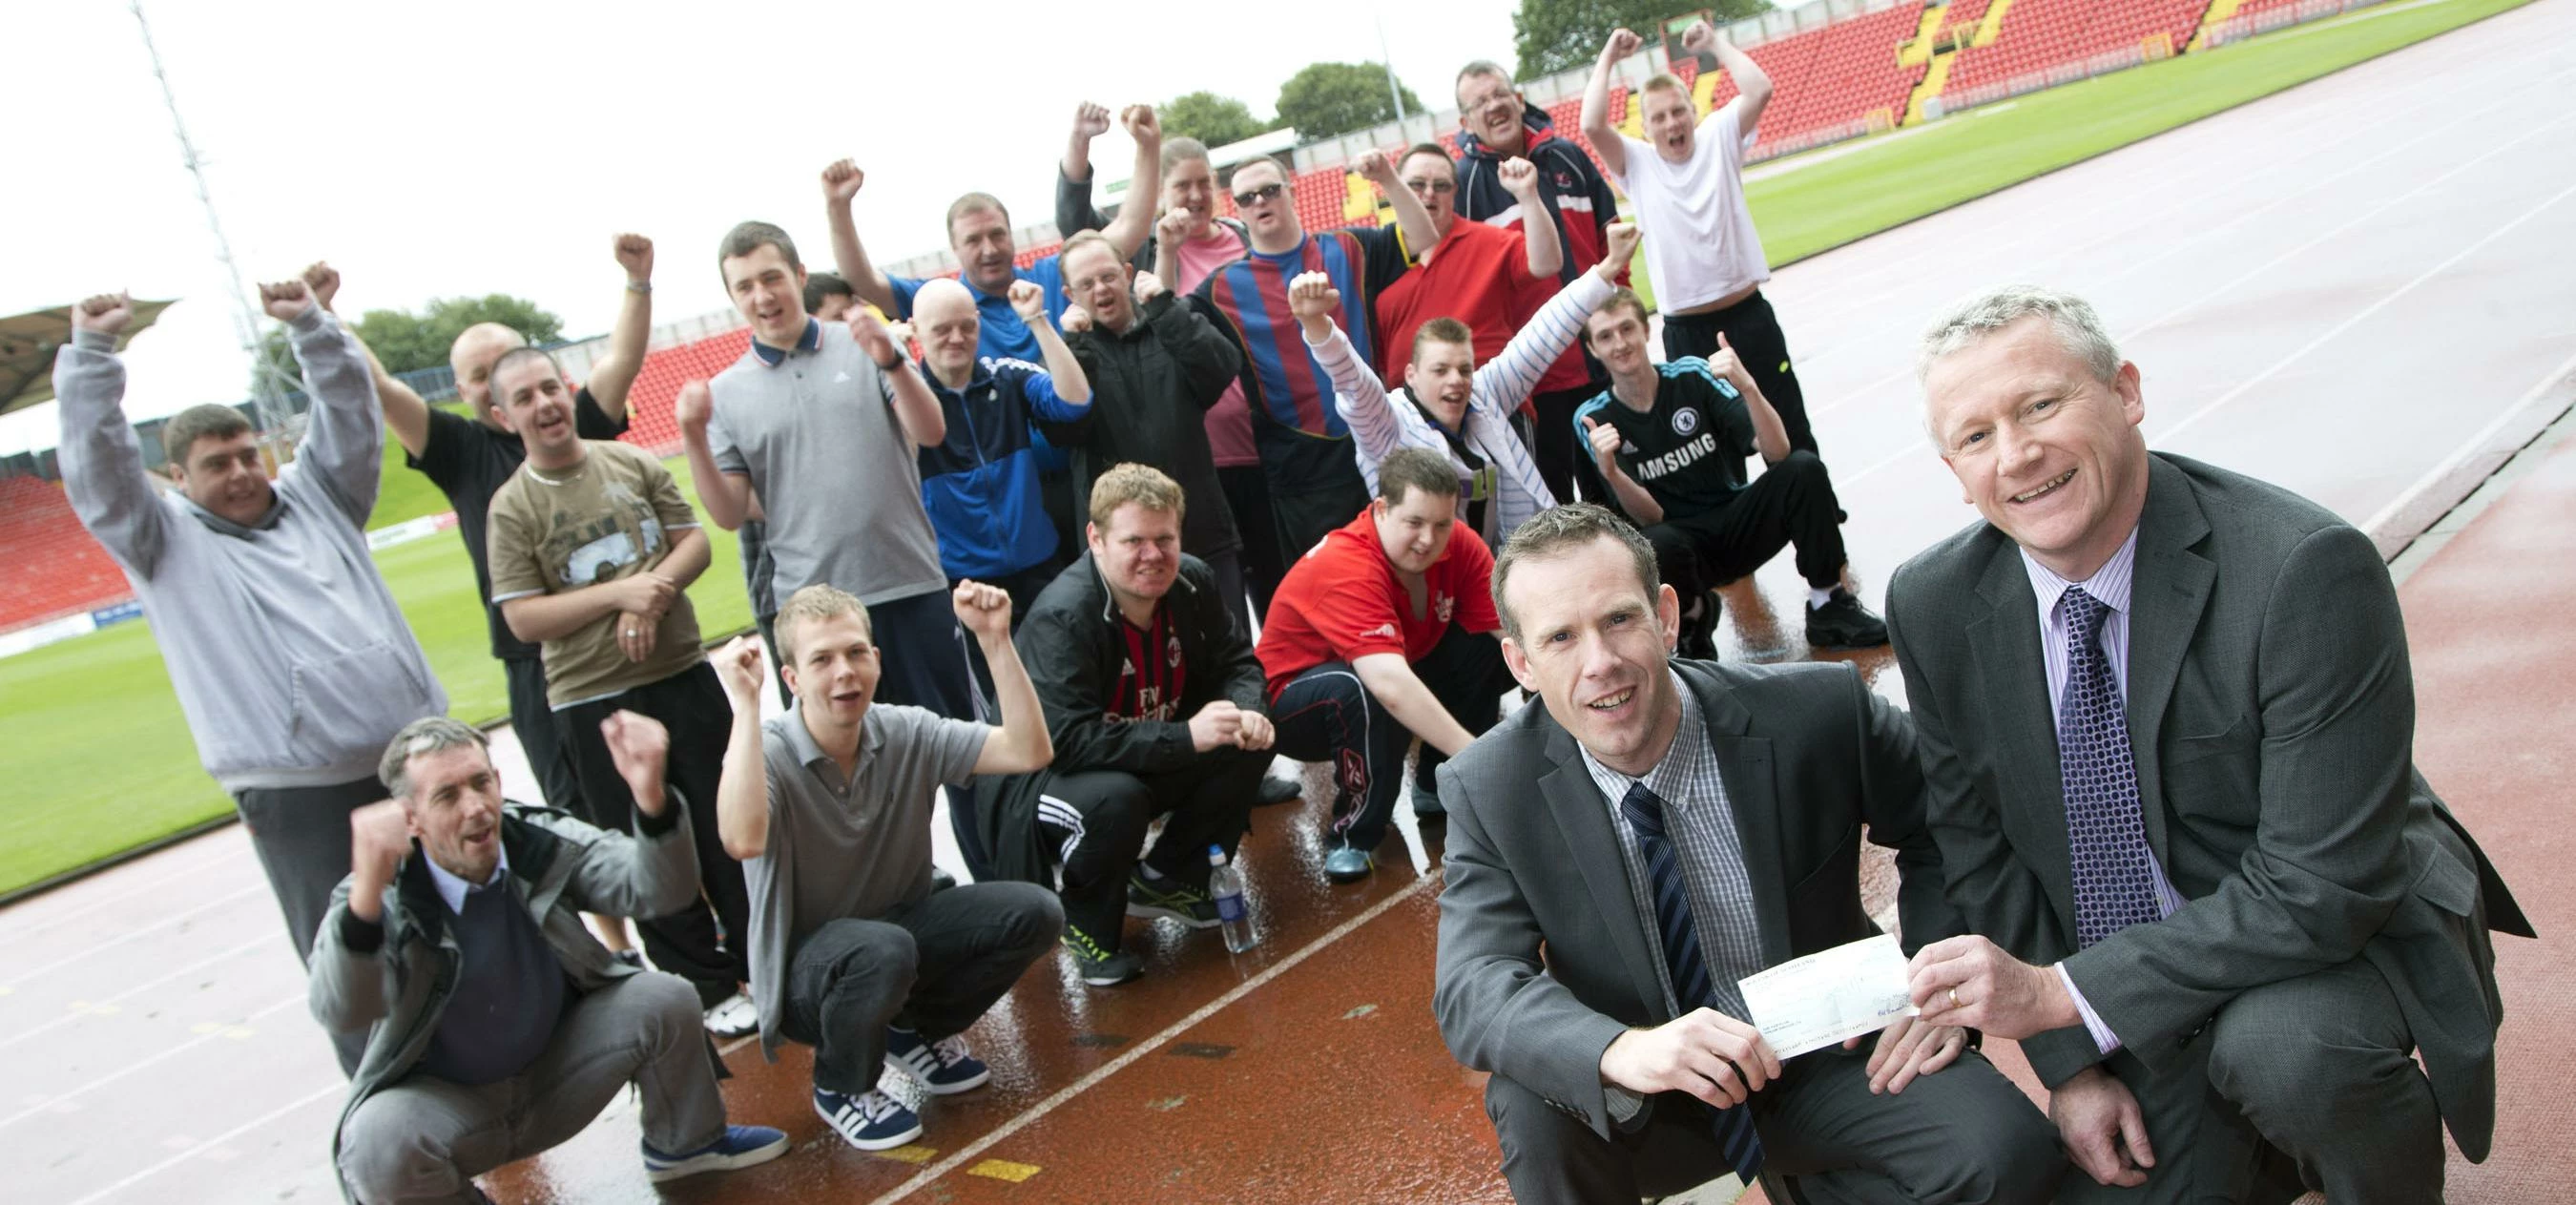 Barry McDonald (Front right) hands the cheque to Keith Hogan as the Gateshead athletes look on.